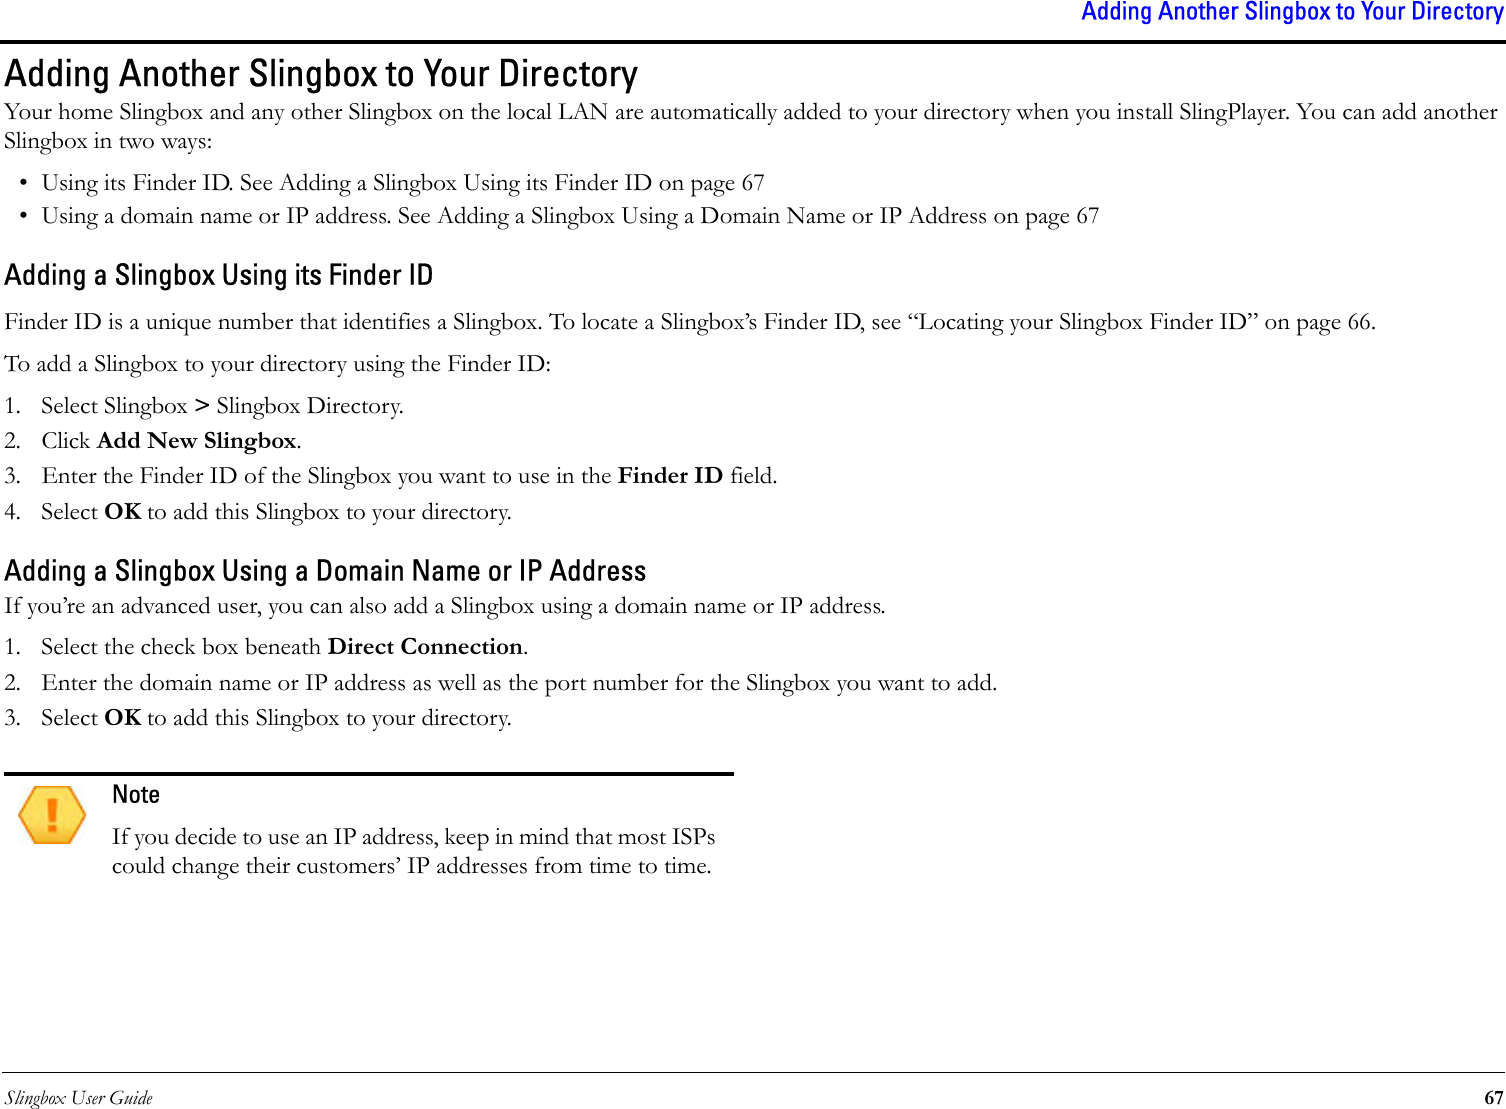 Slingbox User Guide 67Adding Another Slingbox to Your DirectoryAdding Another Slingbox to Your DirectoryYour home Slingbox and any other Slingbox on the local LAN are automatically added to your directory when you install SlingPlayer. You can add another Slingbox in two ways: • Using its Finder ID. See Adding a Slingbox Using its Finder ID on page 67• Using a domain name or IP address. See Adding a Slingbox Using a Domain Name or IP Address on page 67Adding a Slingbox Using its Finder IDFinder ID is a unique number that identifies a Slingbox. To locate a Slingbox’s Finder ID, see “Locating your Slingbox Finder ID” on page 66.To add a Slingbox to your directory using the Finder ID:1. Select Slingbox &gt; Slingbox Directory.2. Click Add New Slingbox.3. Enter the Finder ID of the Slingbox you want to use in the Finder ID field.4. Select OK to add this Slingbox to your directory.Adding a Slingbox Using a Domain Name or IP AddressIf you’re an advanced user, you can also add a Slingbox using a domain name or IP address. 1. Select the check box beneath Direct Connection.2. Enter the domain name or IP address as well as the port number for the Slingbox you want to add.3. Select OK to add this Slingbox to your directory.NoteIf you decide to use an IP address, keep in mind that most ISPs could change their customers’ IP addresses from time to time.